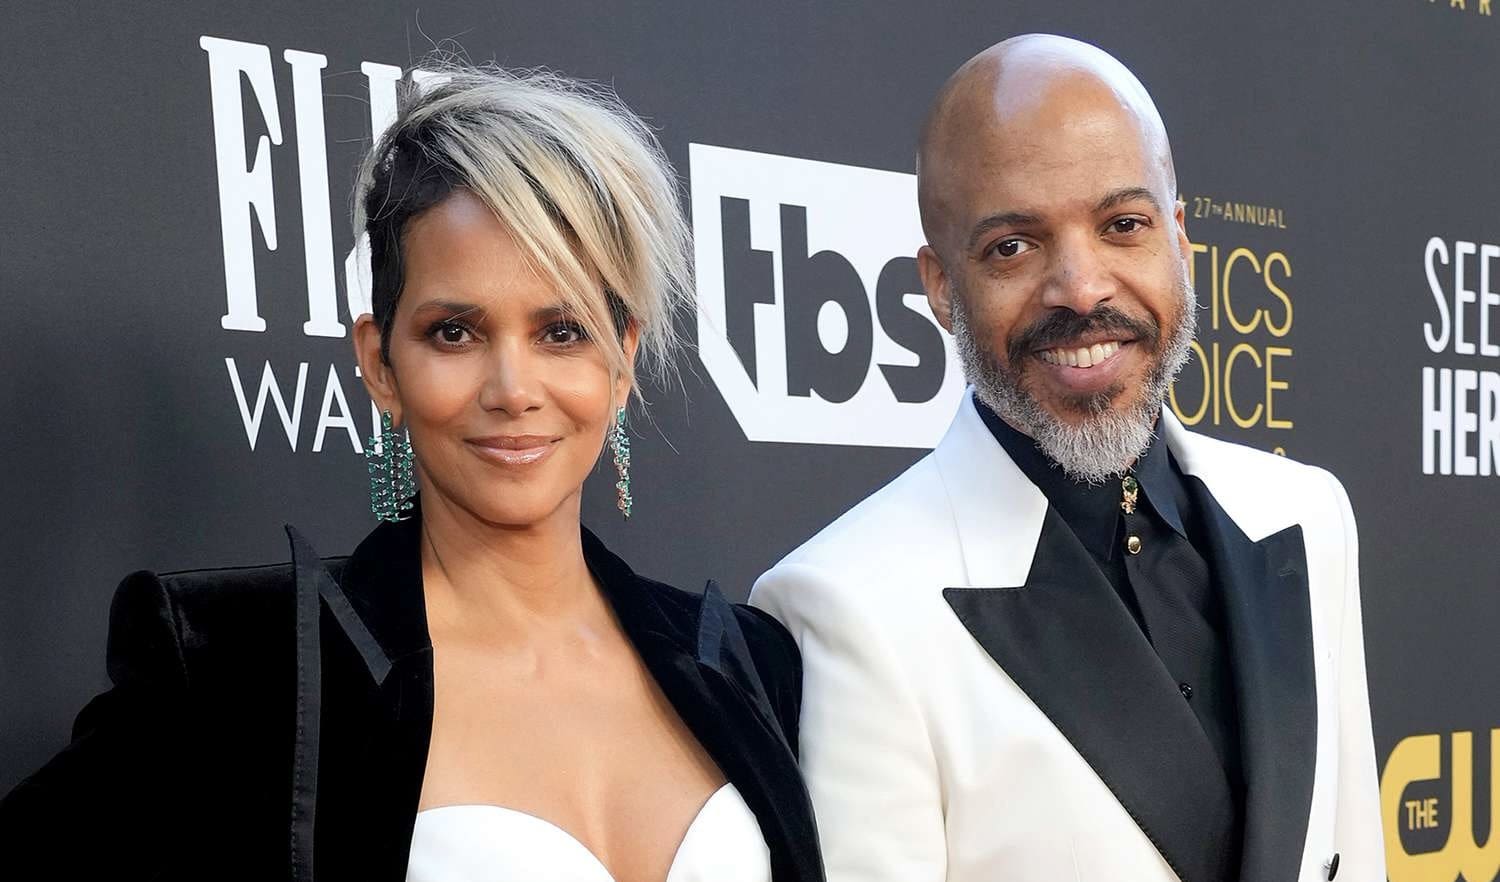 Report: Halle Berry Won’t Get Hitched to Van Hunt Without a Prenup to ‘Protect’ Her $90 Million Fortune